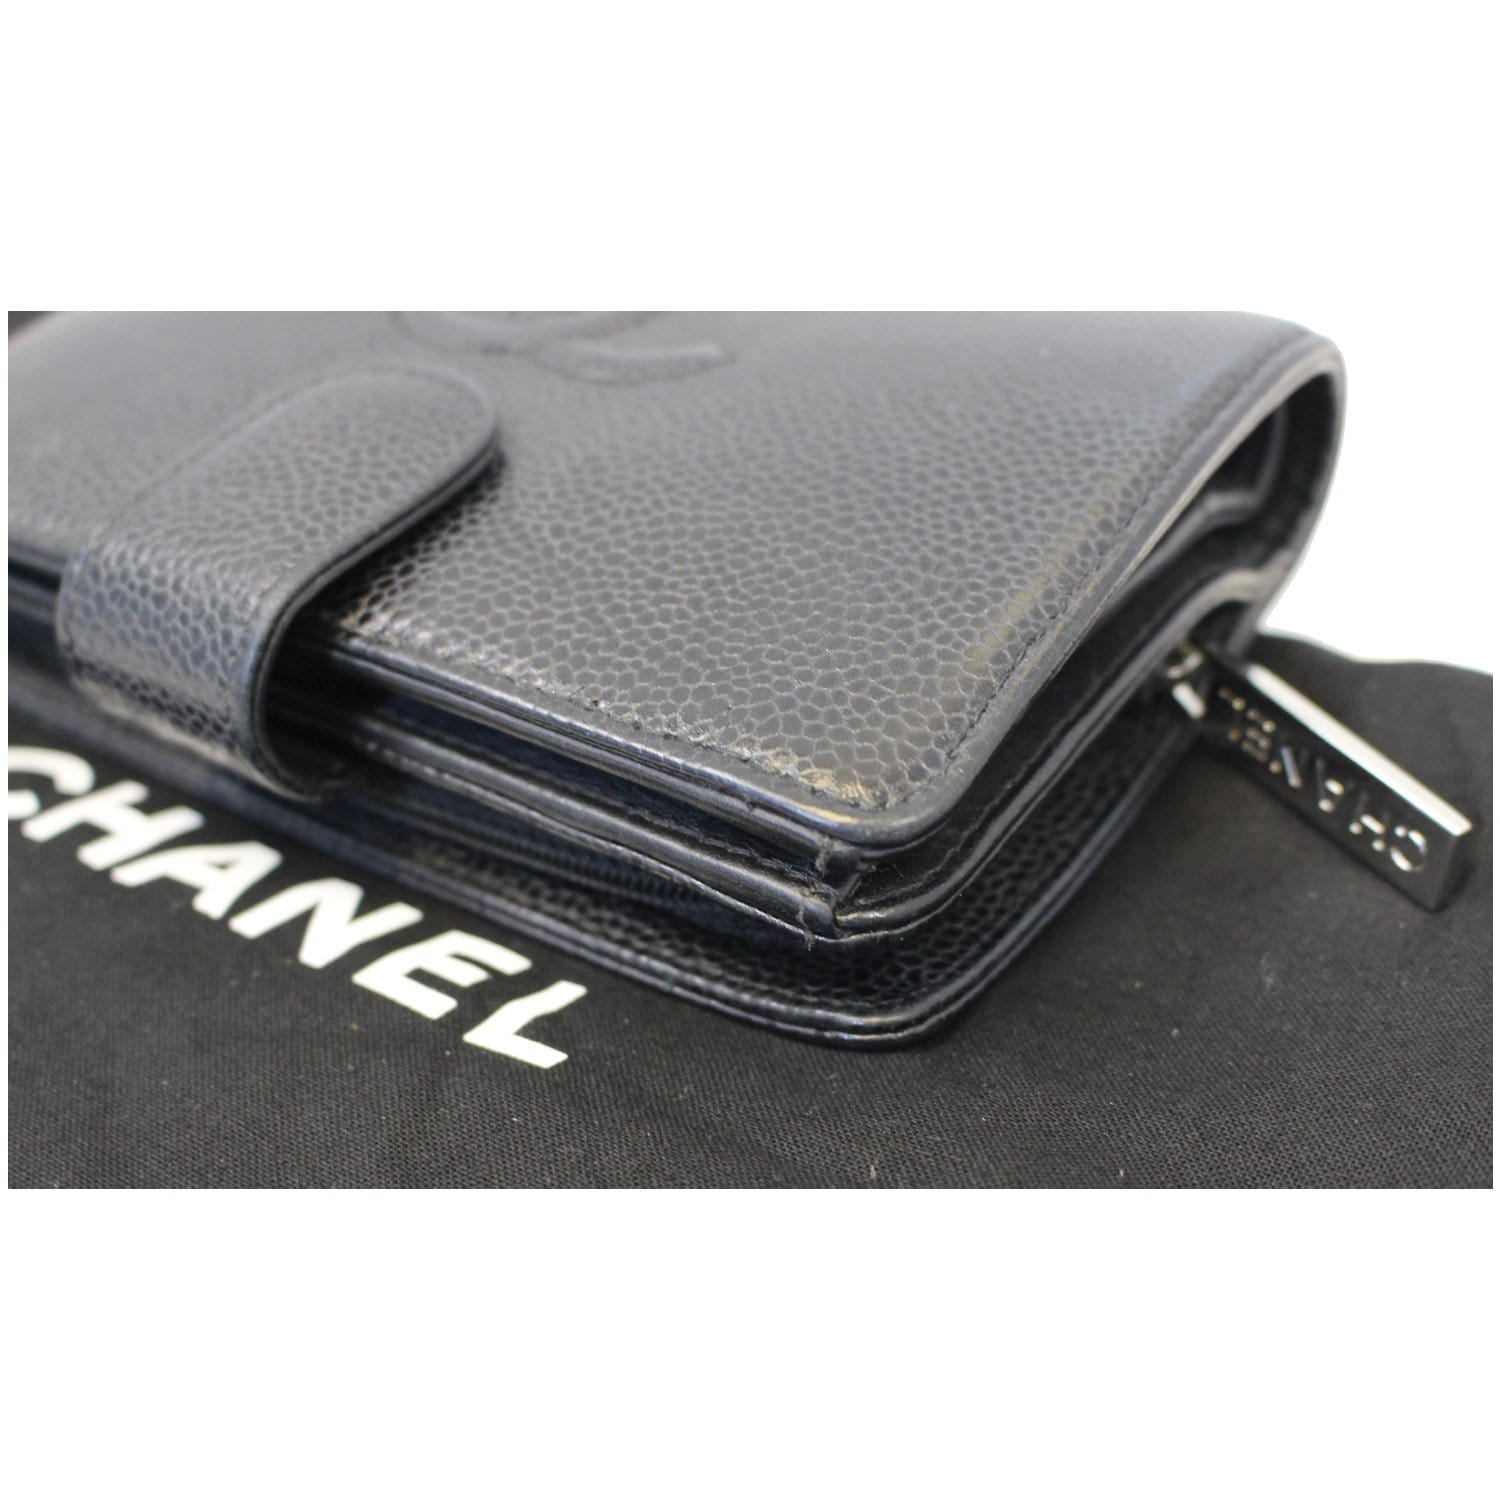 Chanel Black Quilted Caviar Leather Bifold Men's Wallet 667cas618 –  Bagriculture